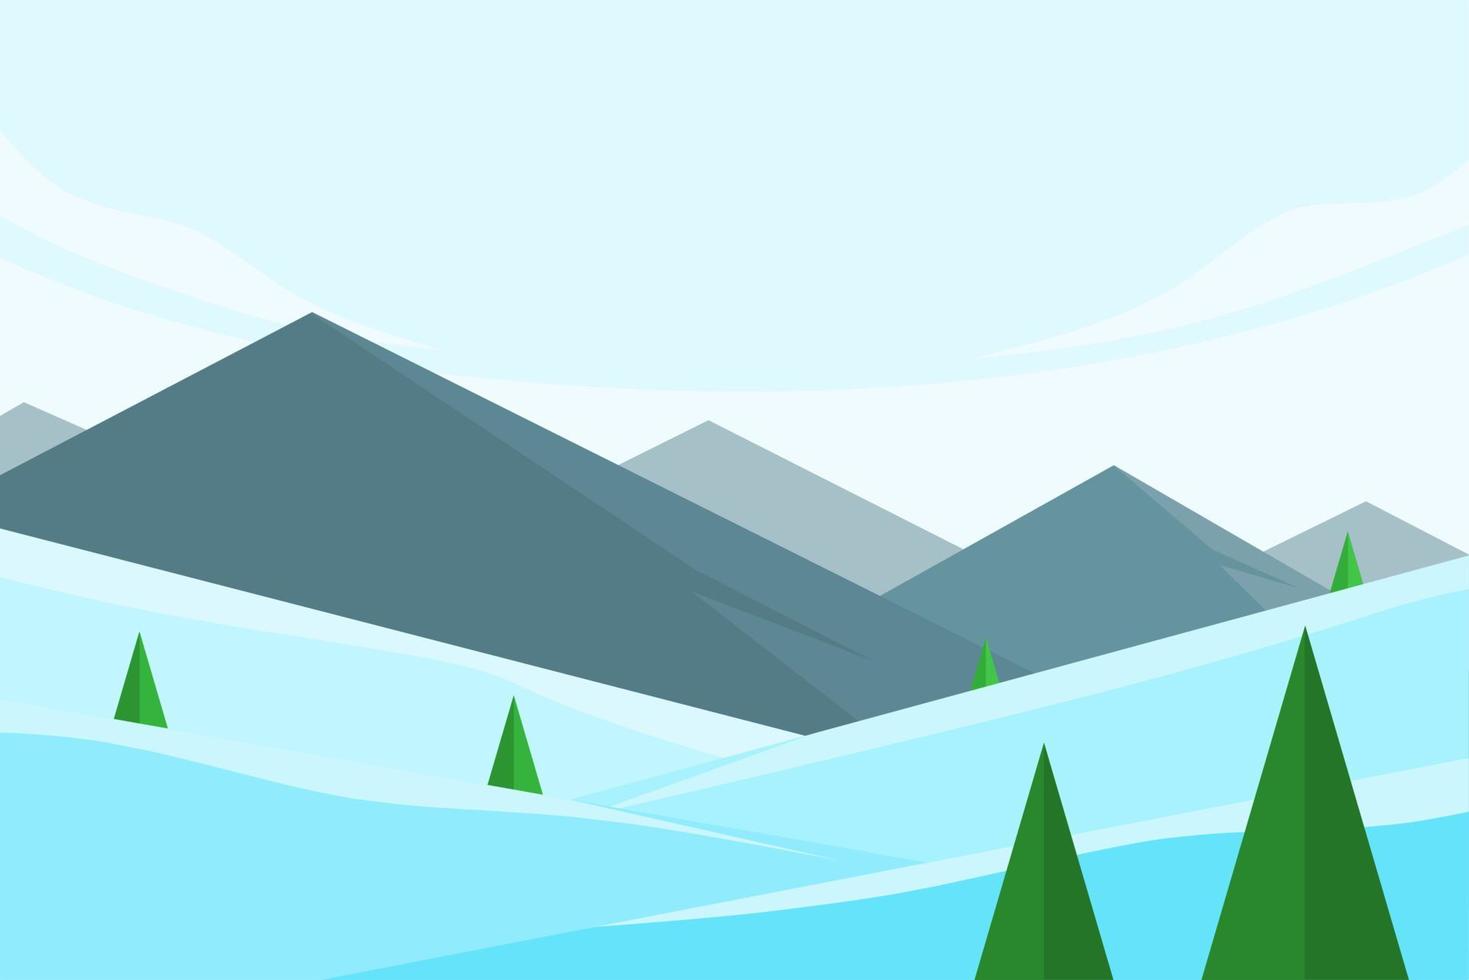 winter landscape flat illustration with pine trees and rock mountains vector